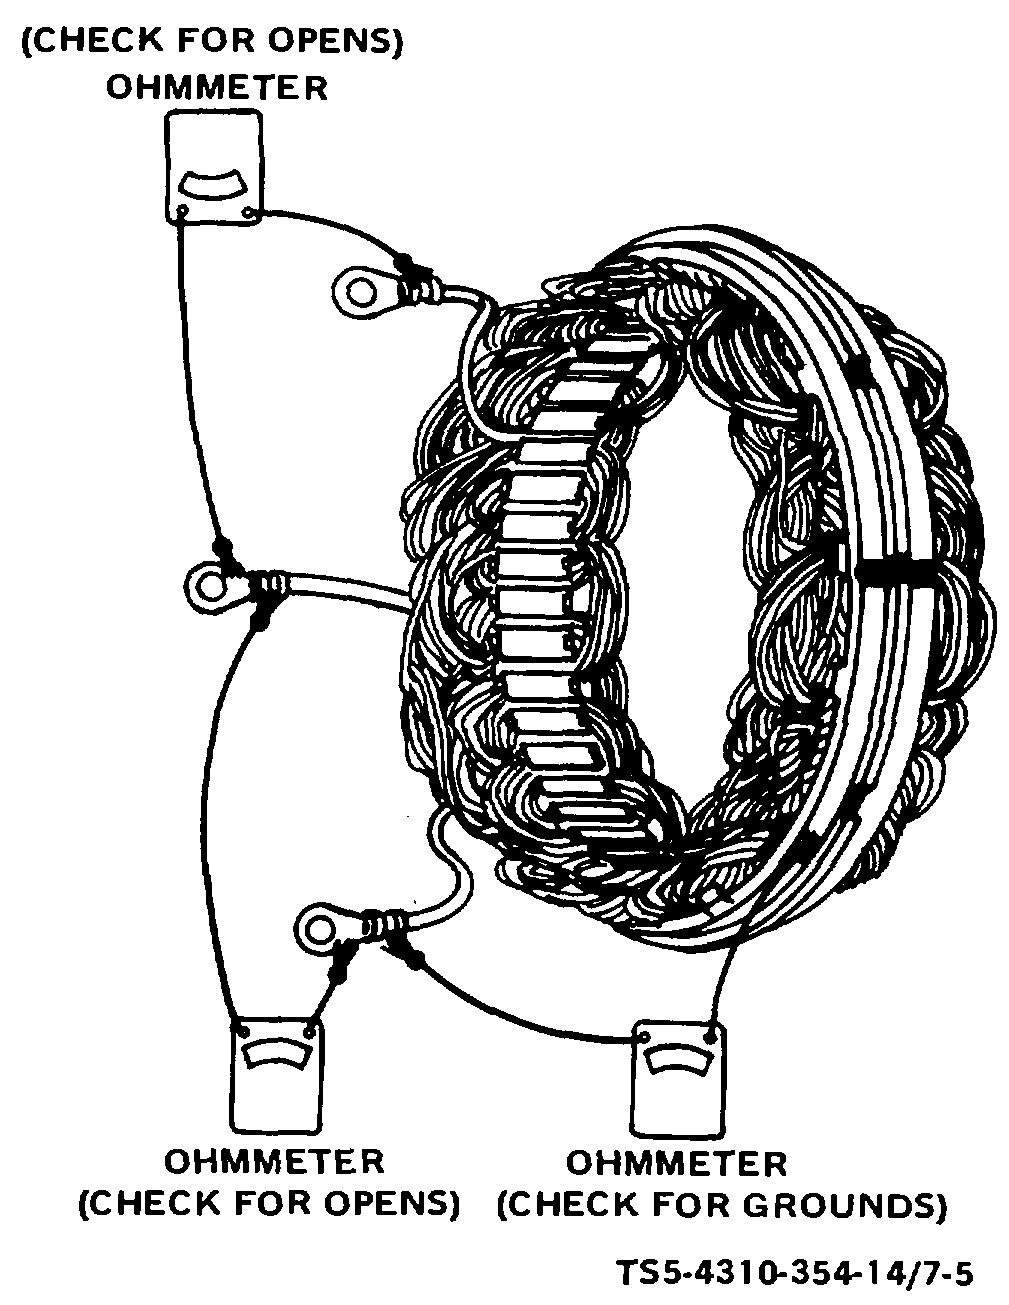 If the meter reading is high when successively connected between each pair of stator leads, the windings are open.